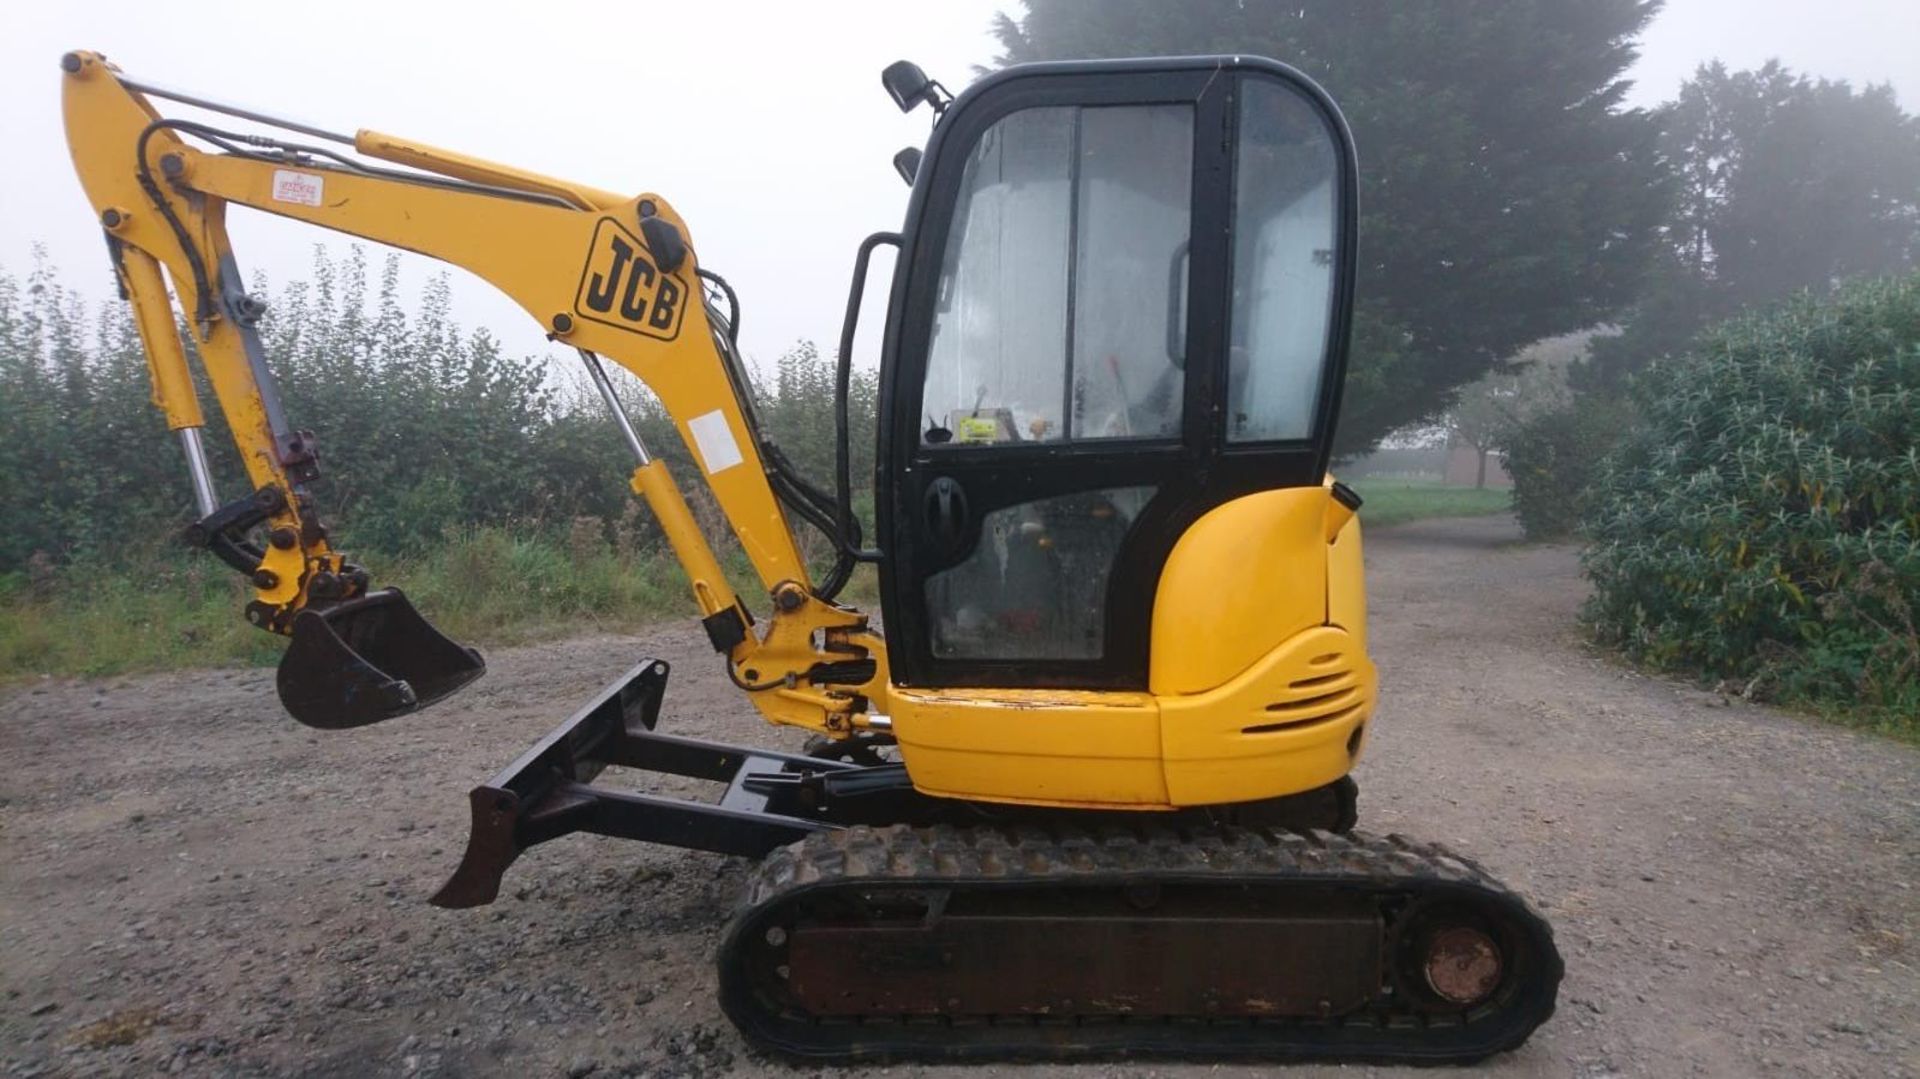 JCB SO8027z 2002 3T DIGGER 2385HOURS c/w BUCKETS &QUICK HITCH HEADSTOCK